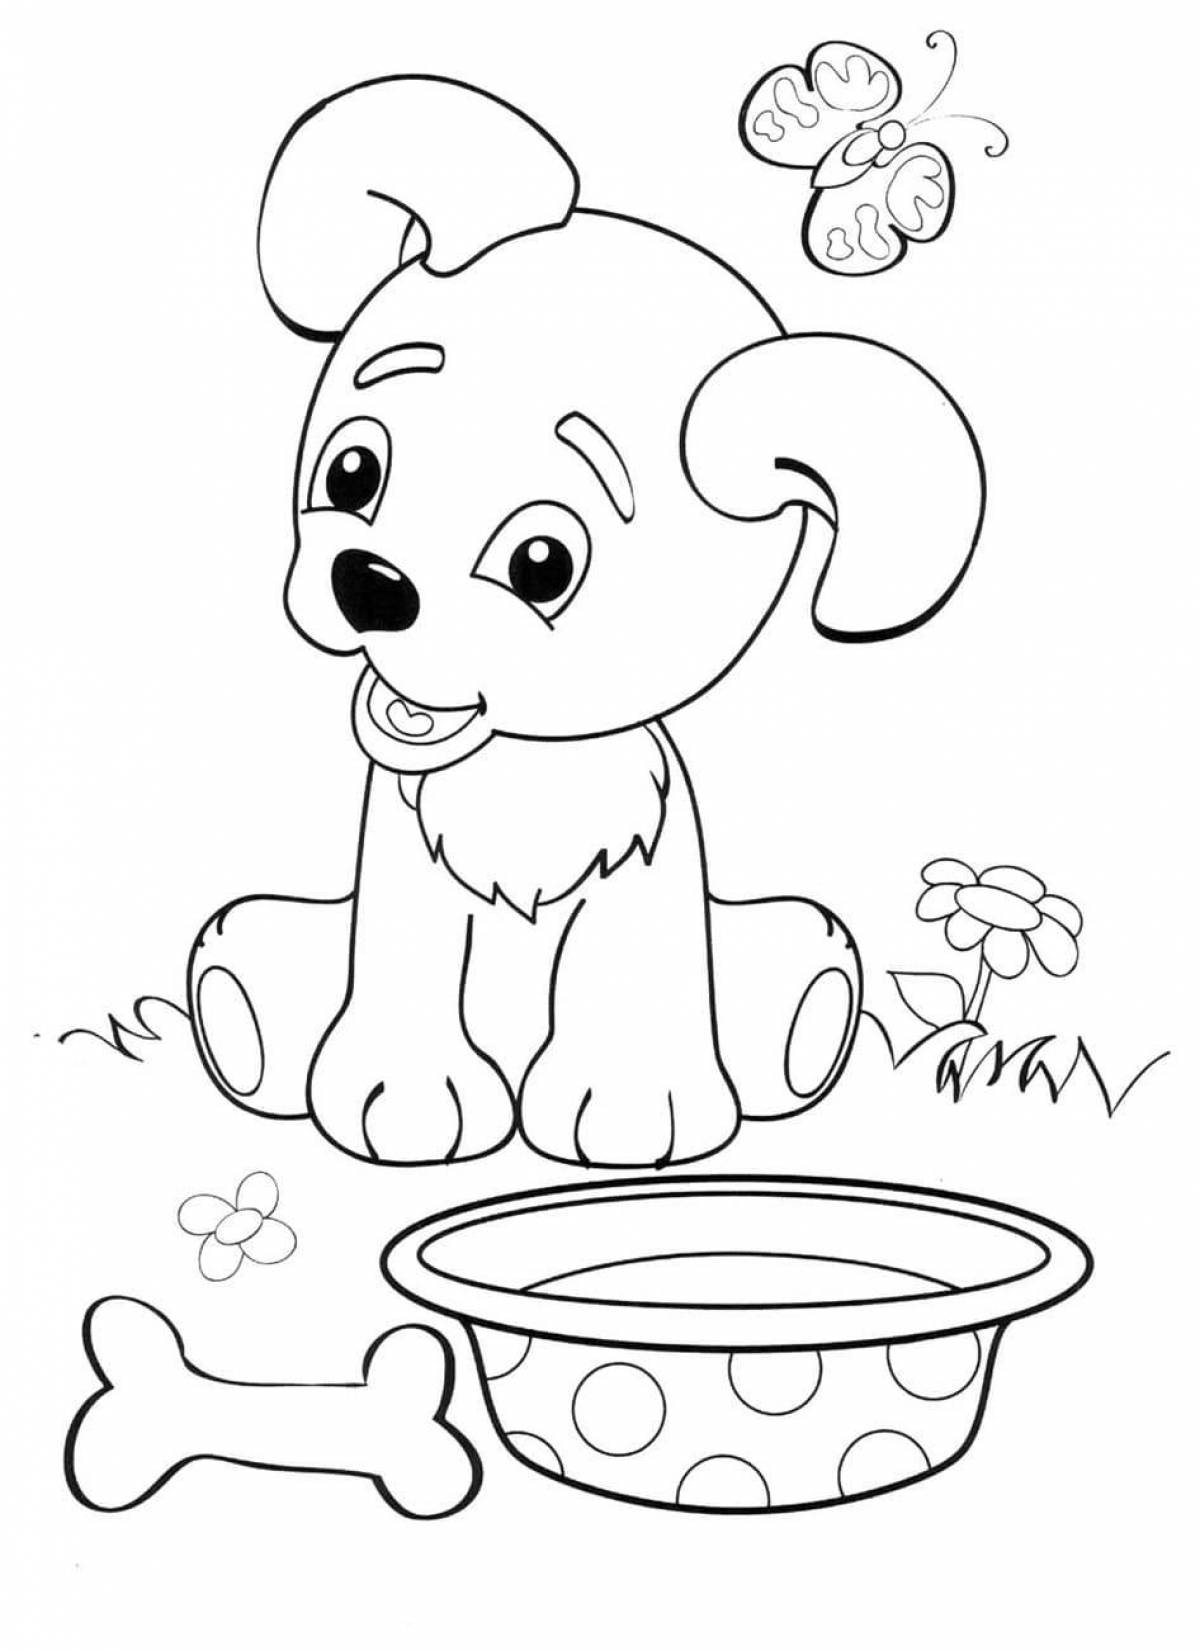 Snazzy doggie coloring page